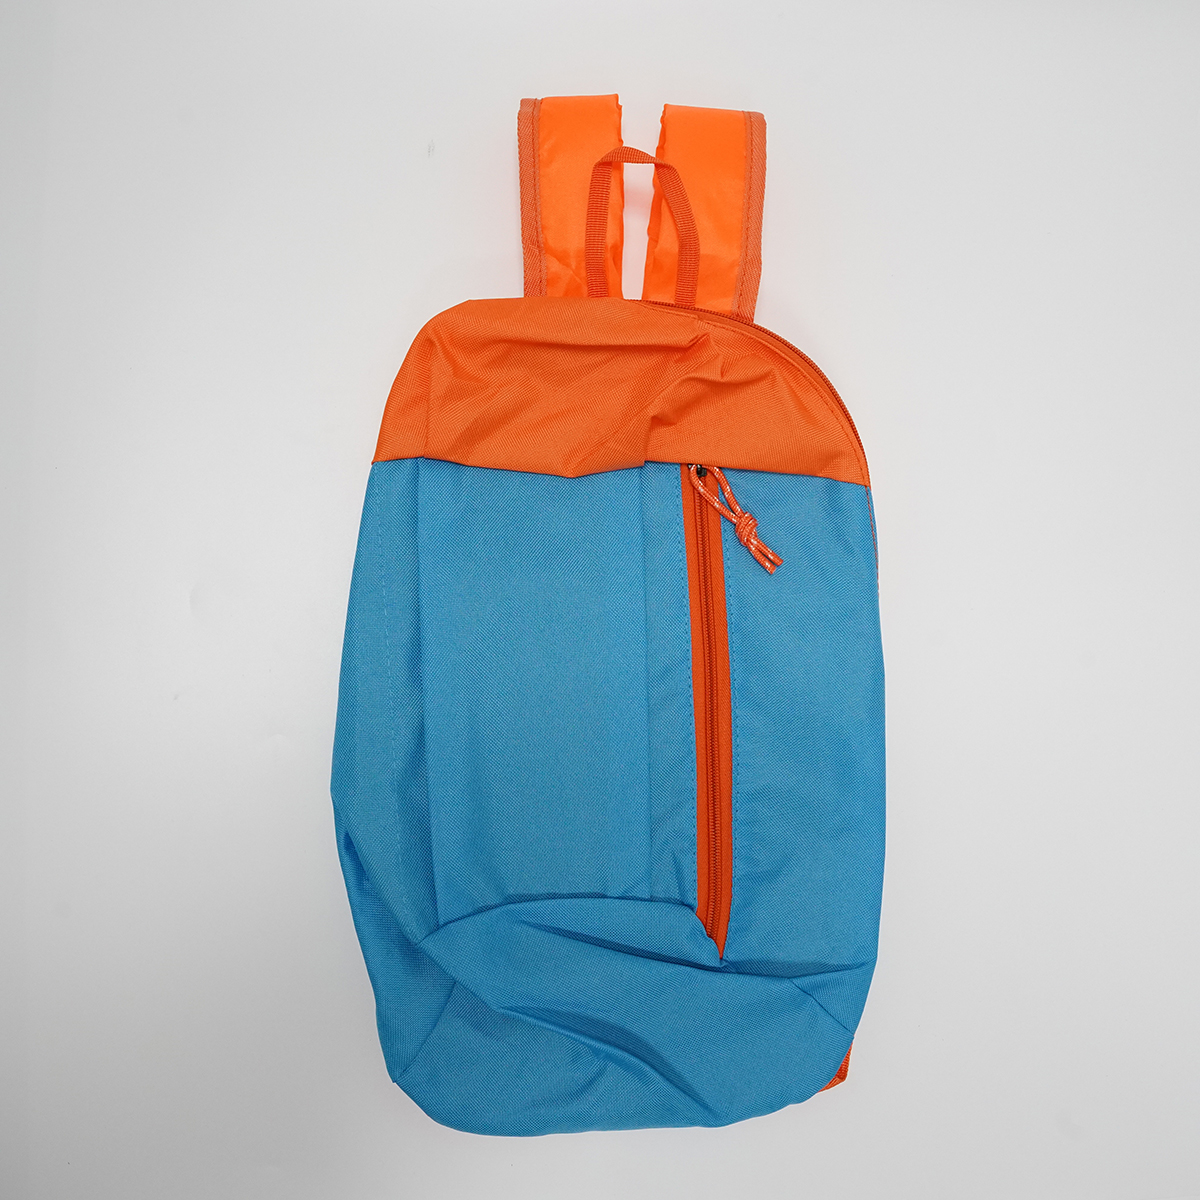 Promotional Colored Hiking Backpack3